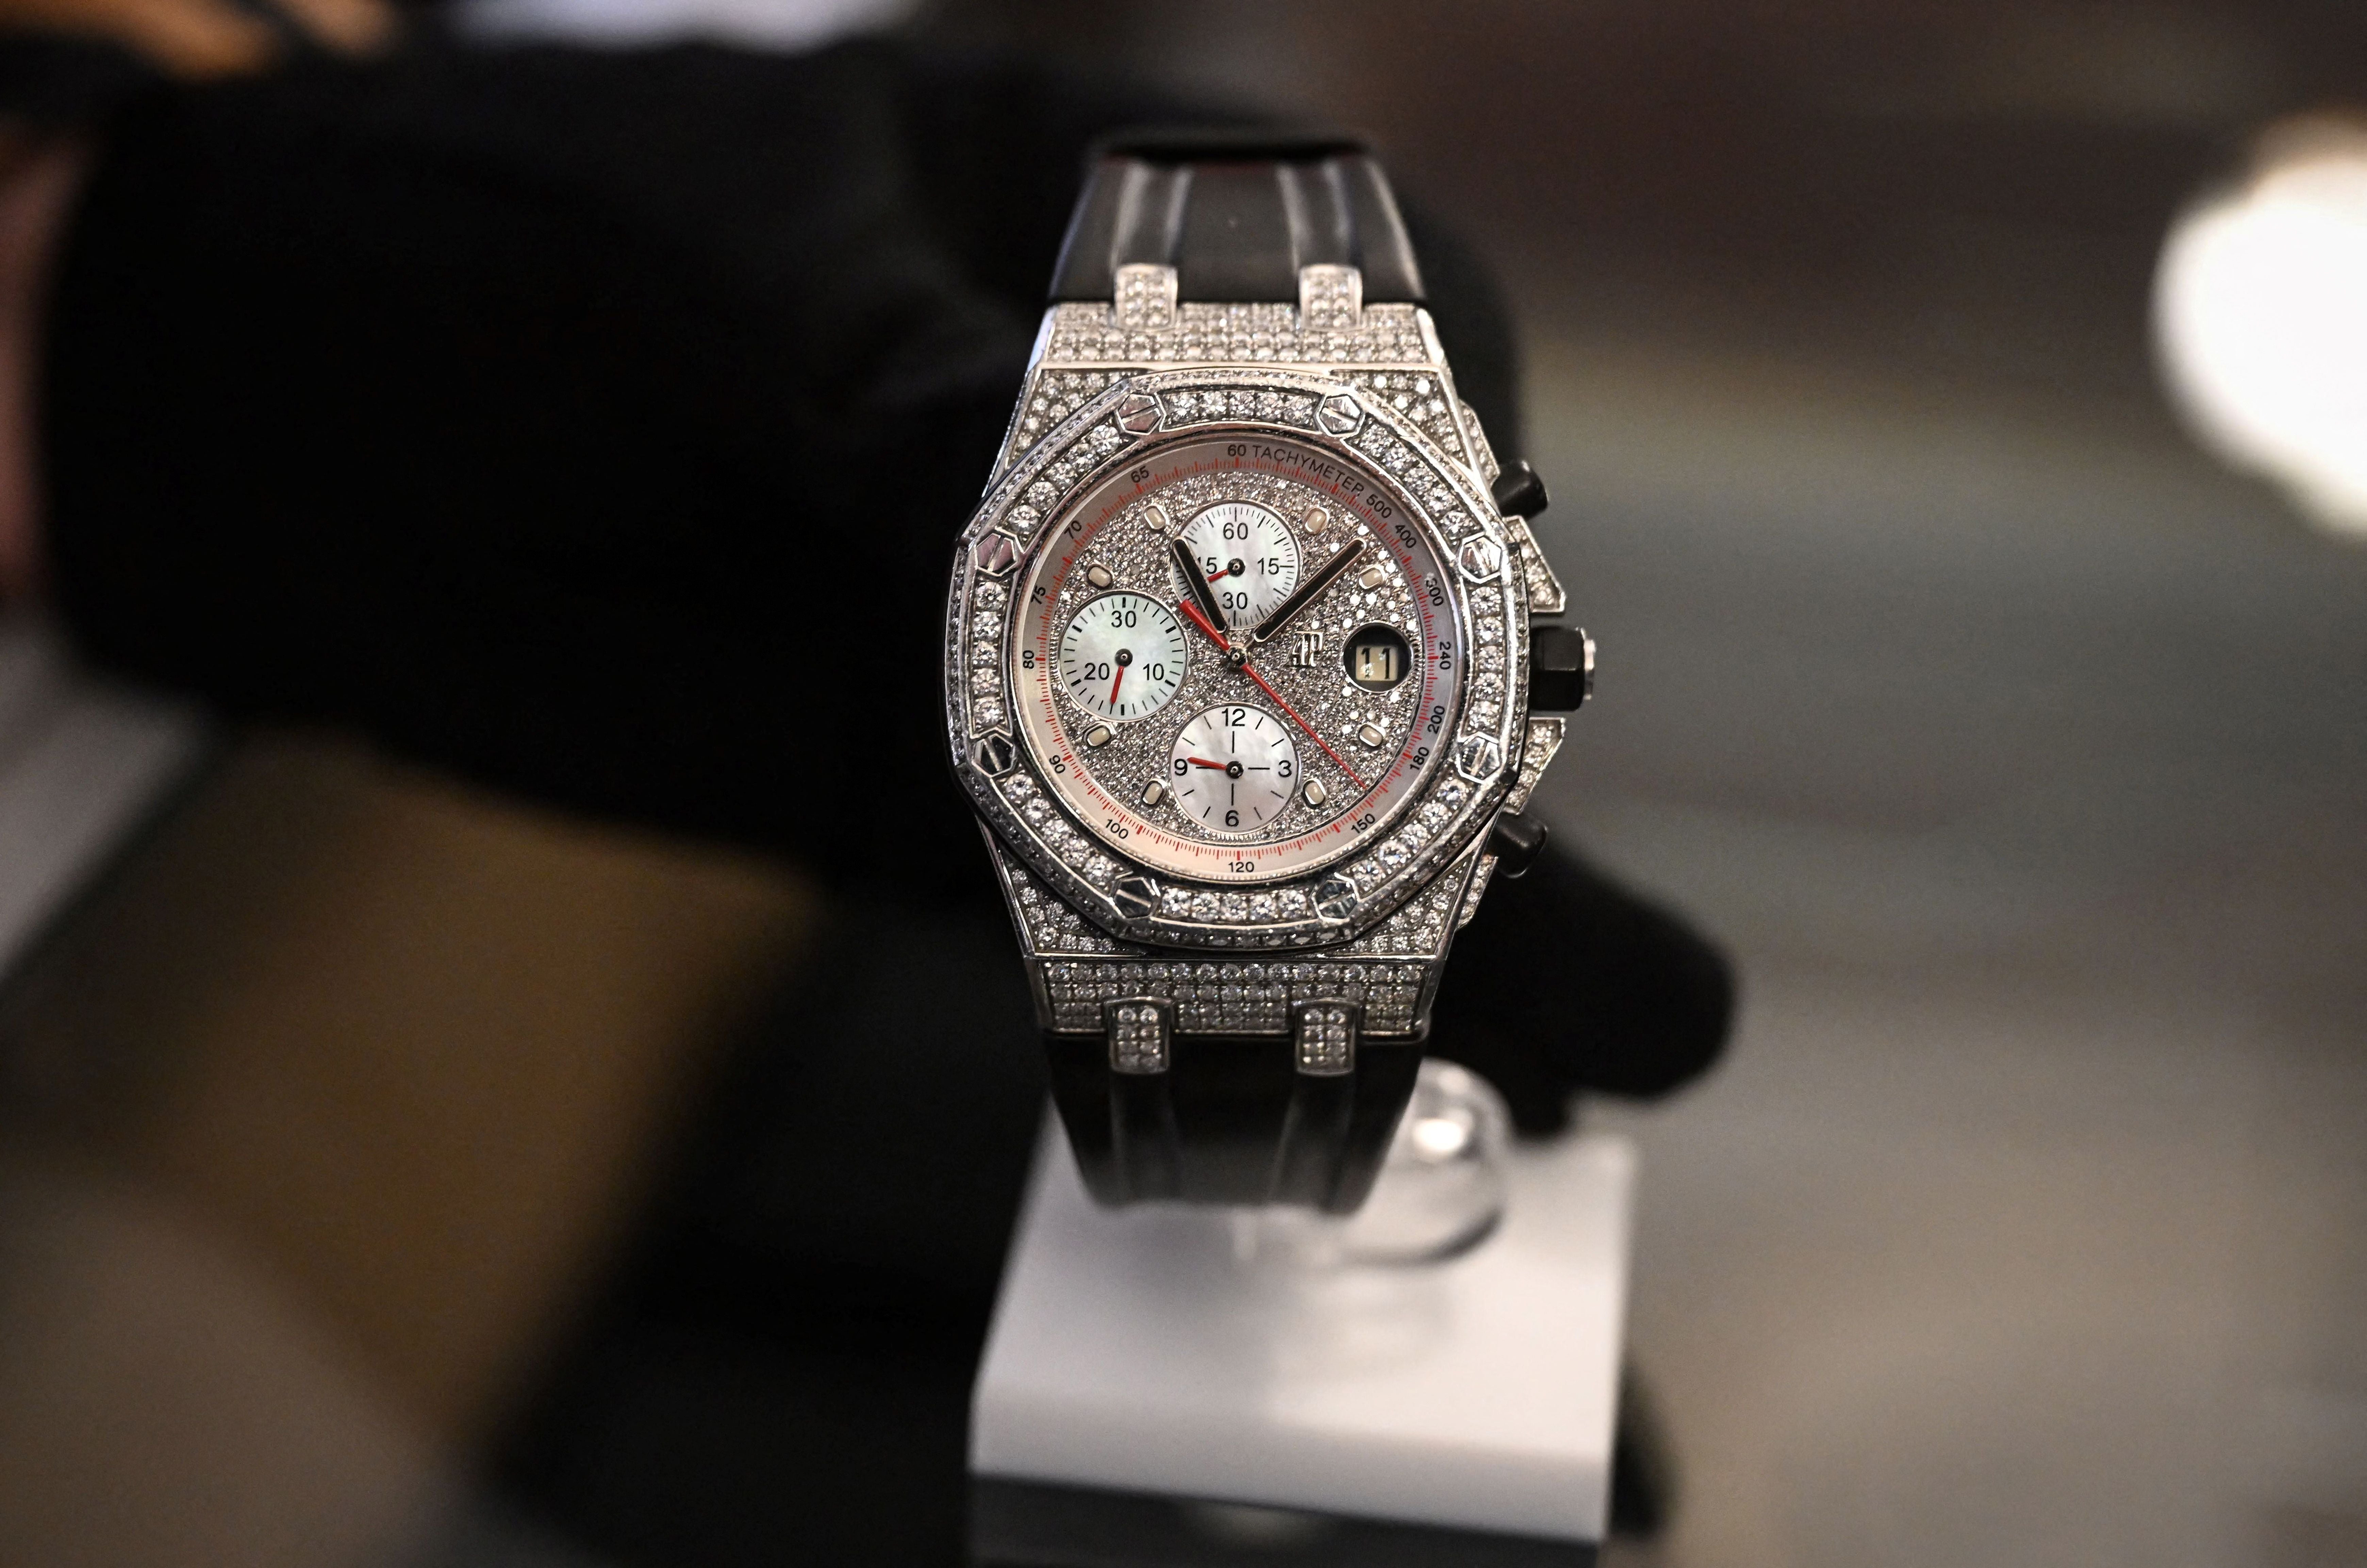 An Audemars Piguet Royal Oak watch is on display during an auction in Paris of items seized by the courts in drug trafficking cases